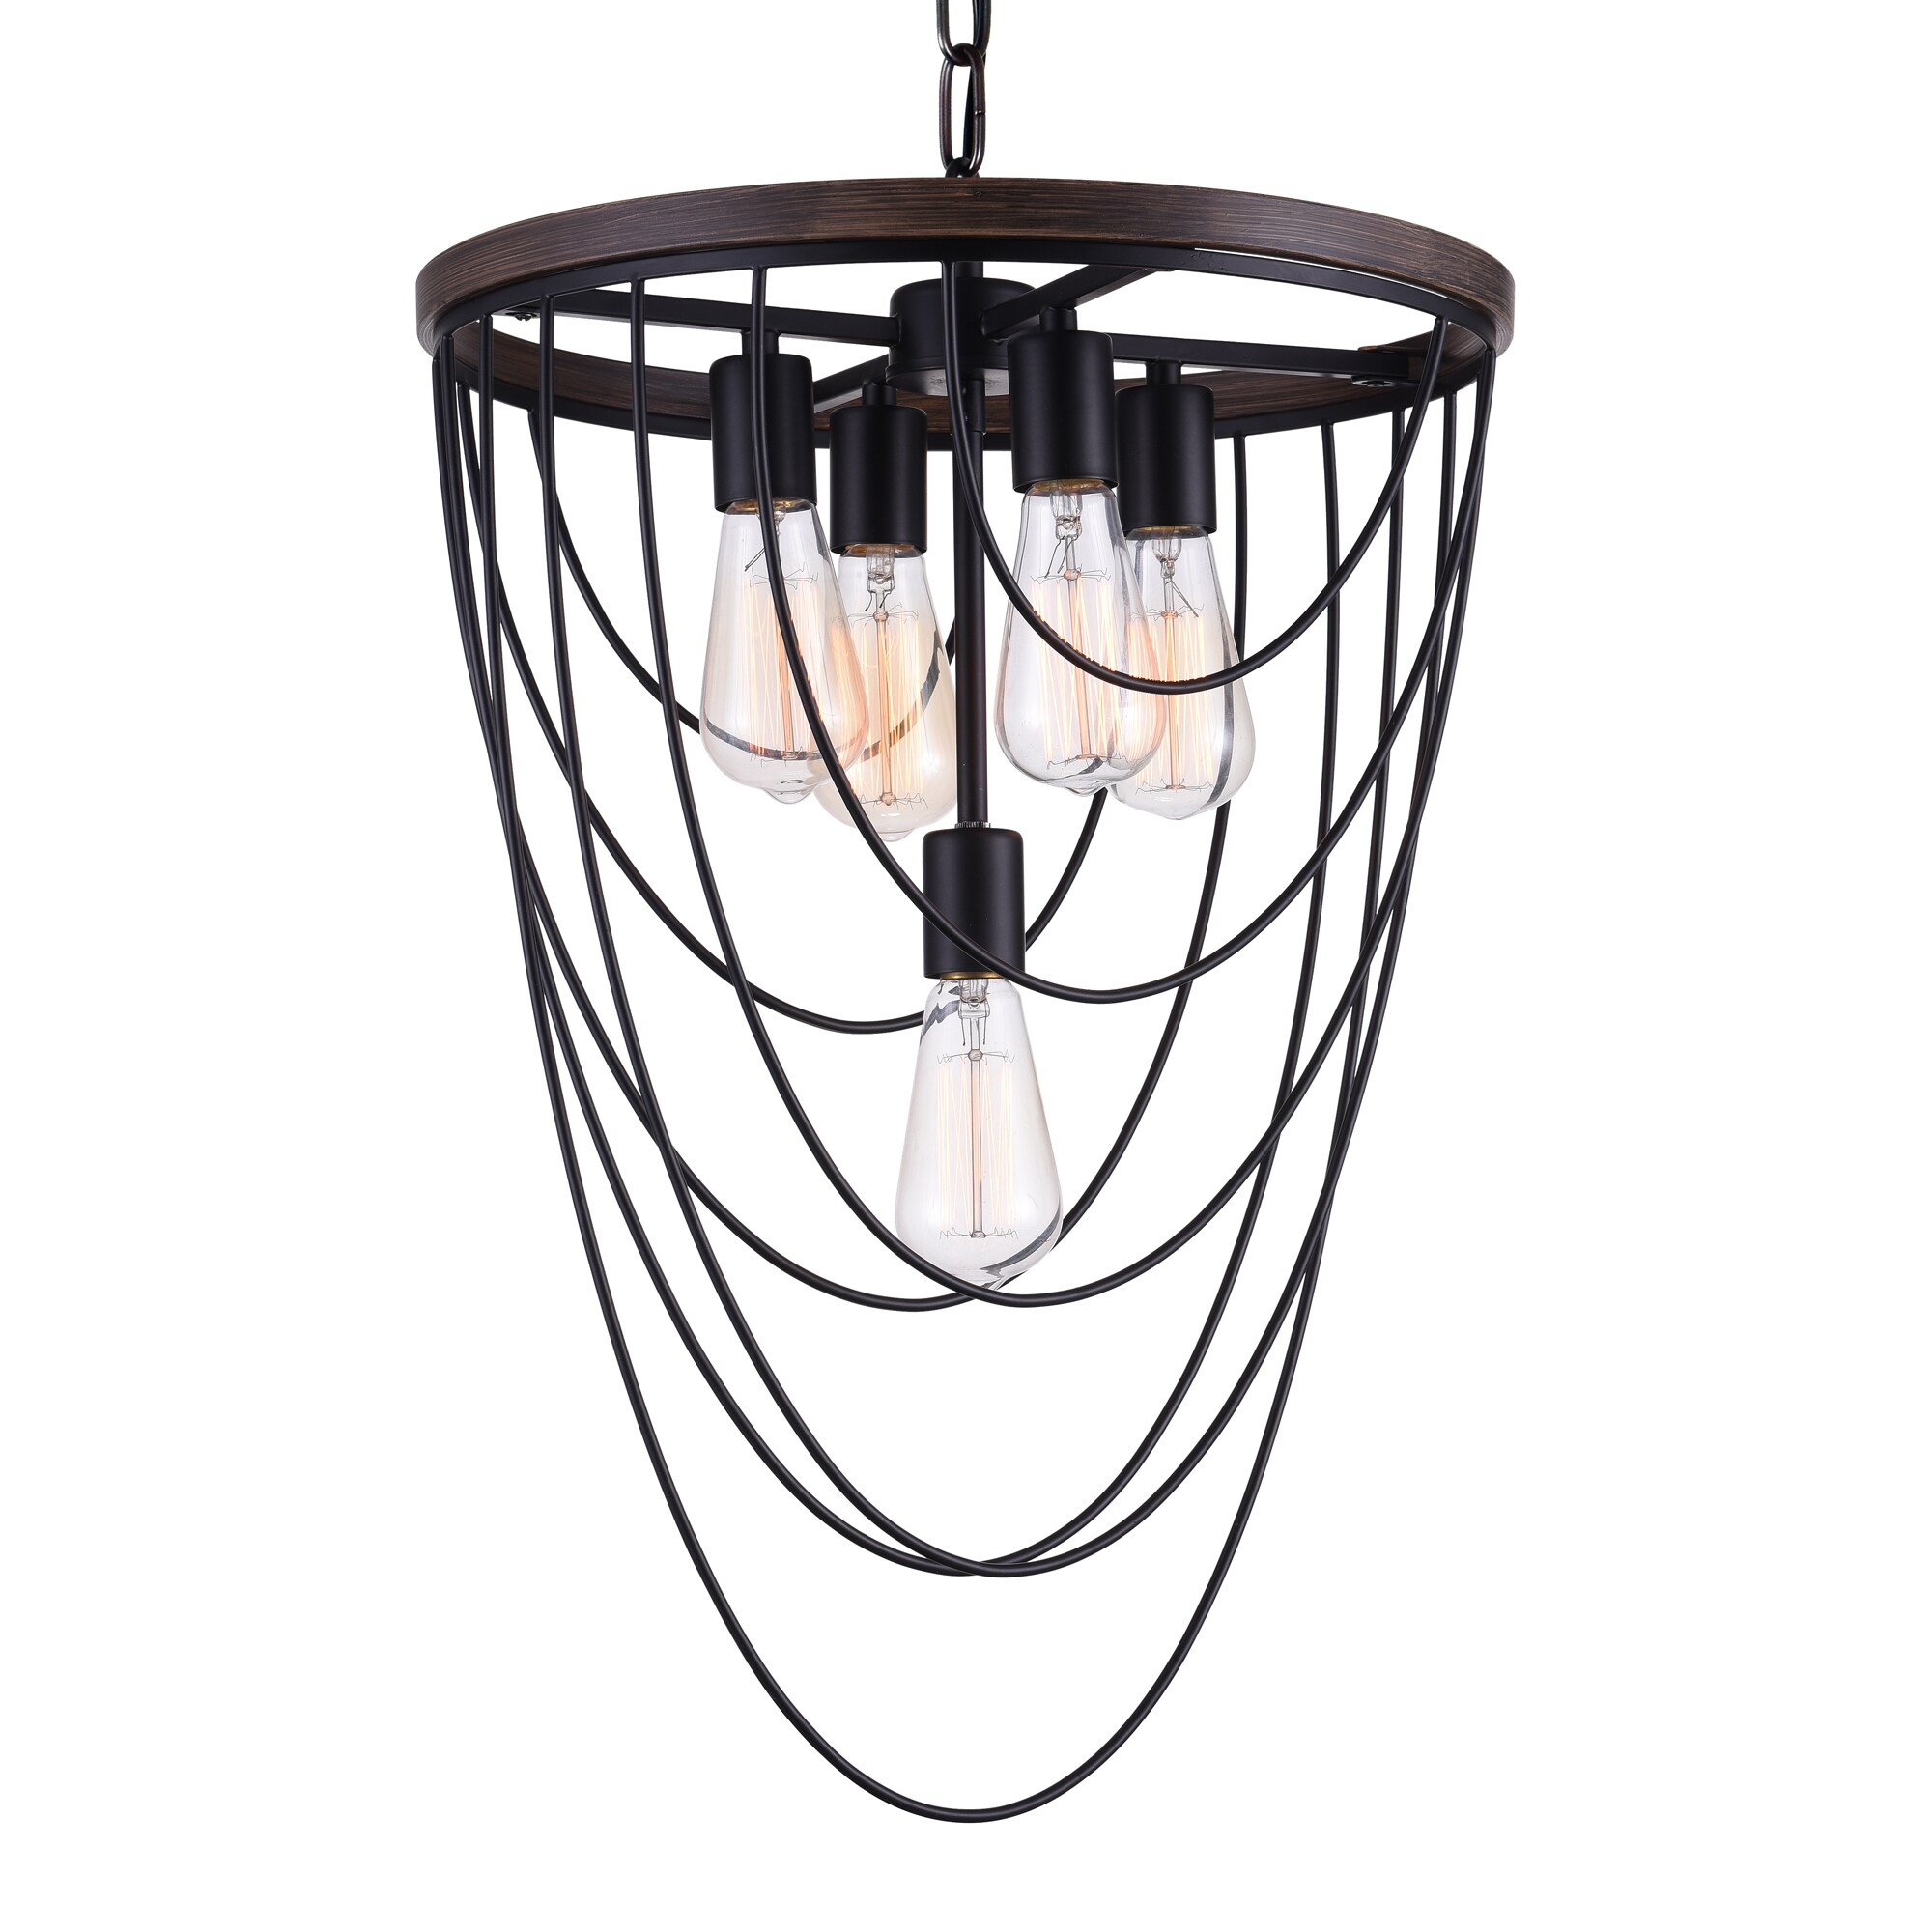 CWI Lighting Gala 5-Light Black Rustic Damp Rated Chandelier in the ...